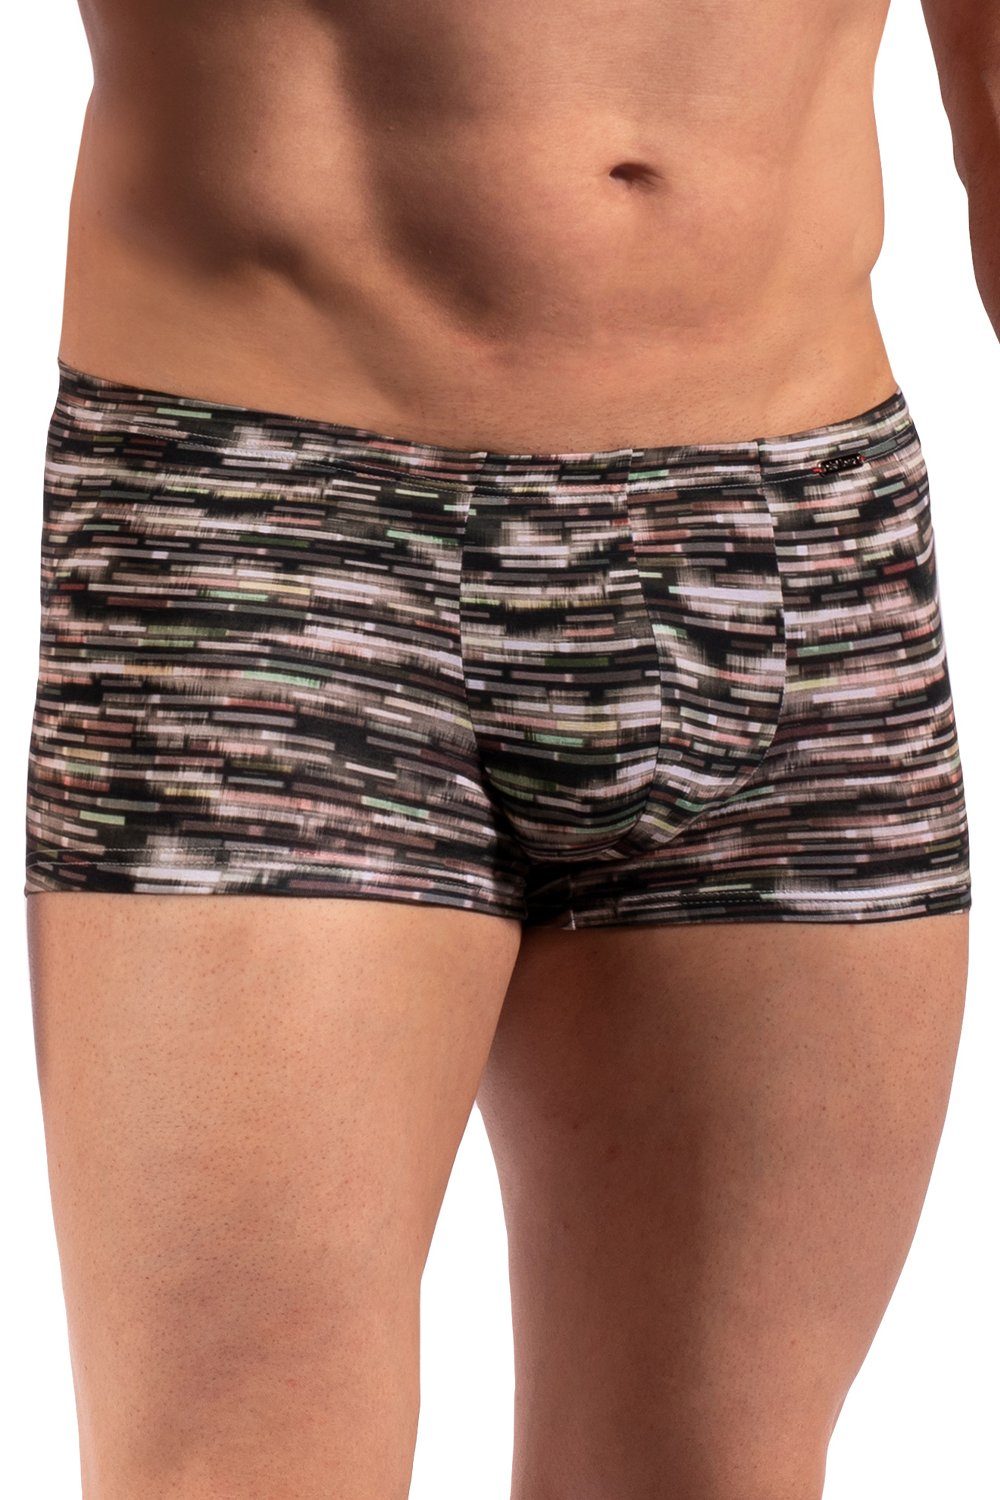 Olaf Benz Hipster Minipants 109181